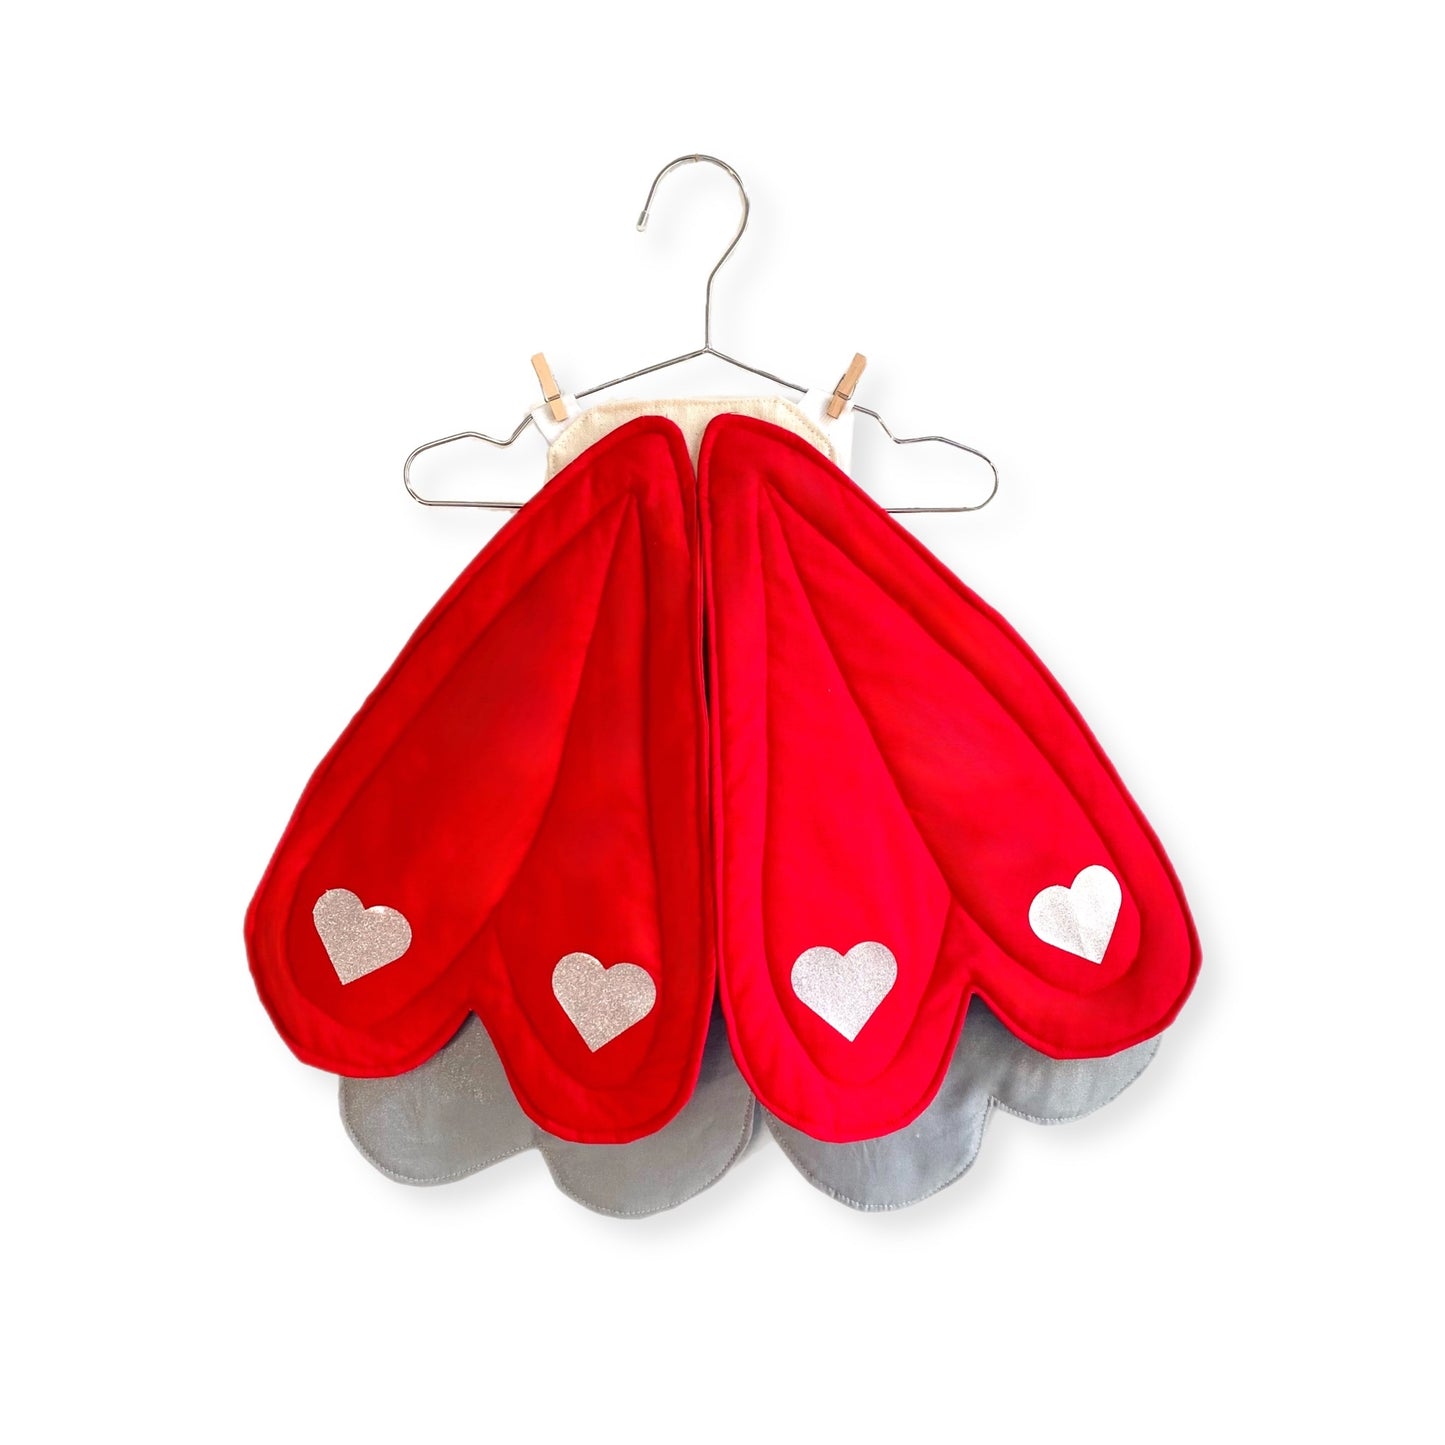 Cupid wings with red heart wings for kids.